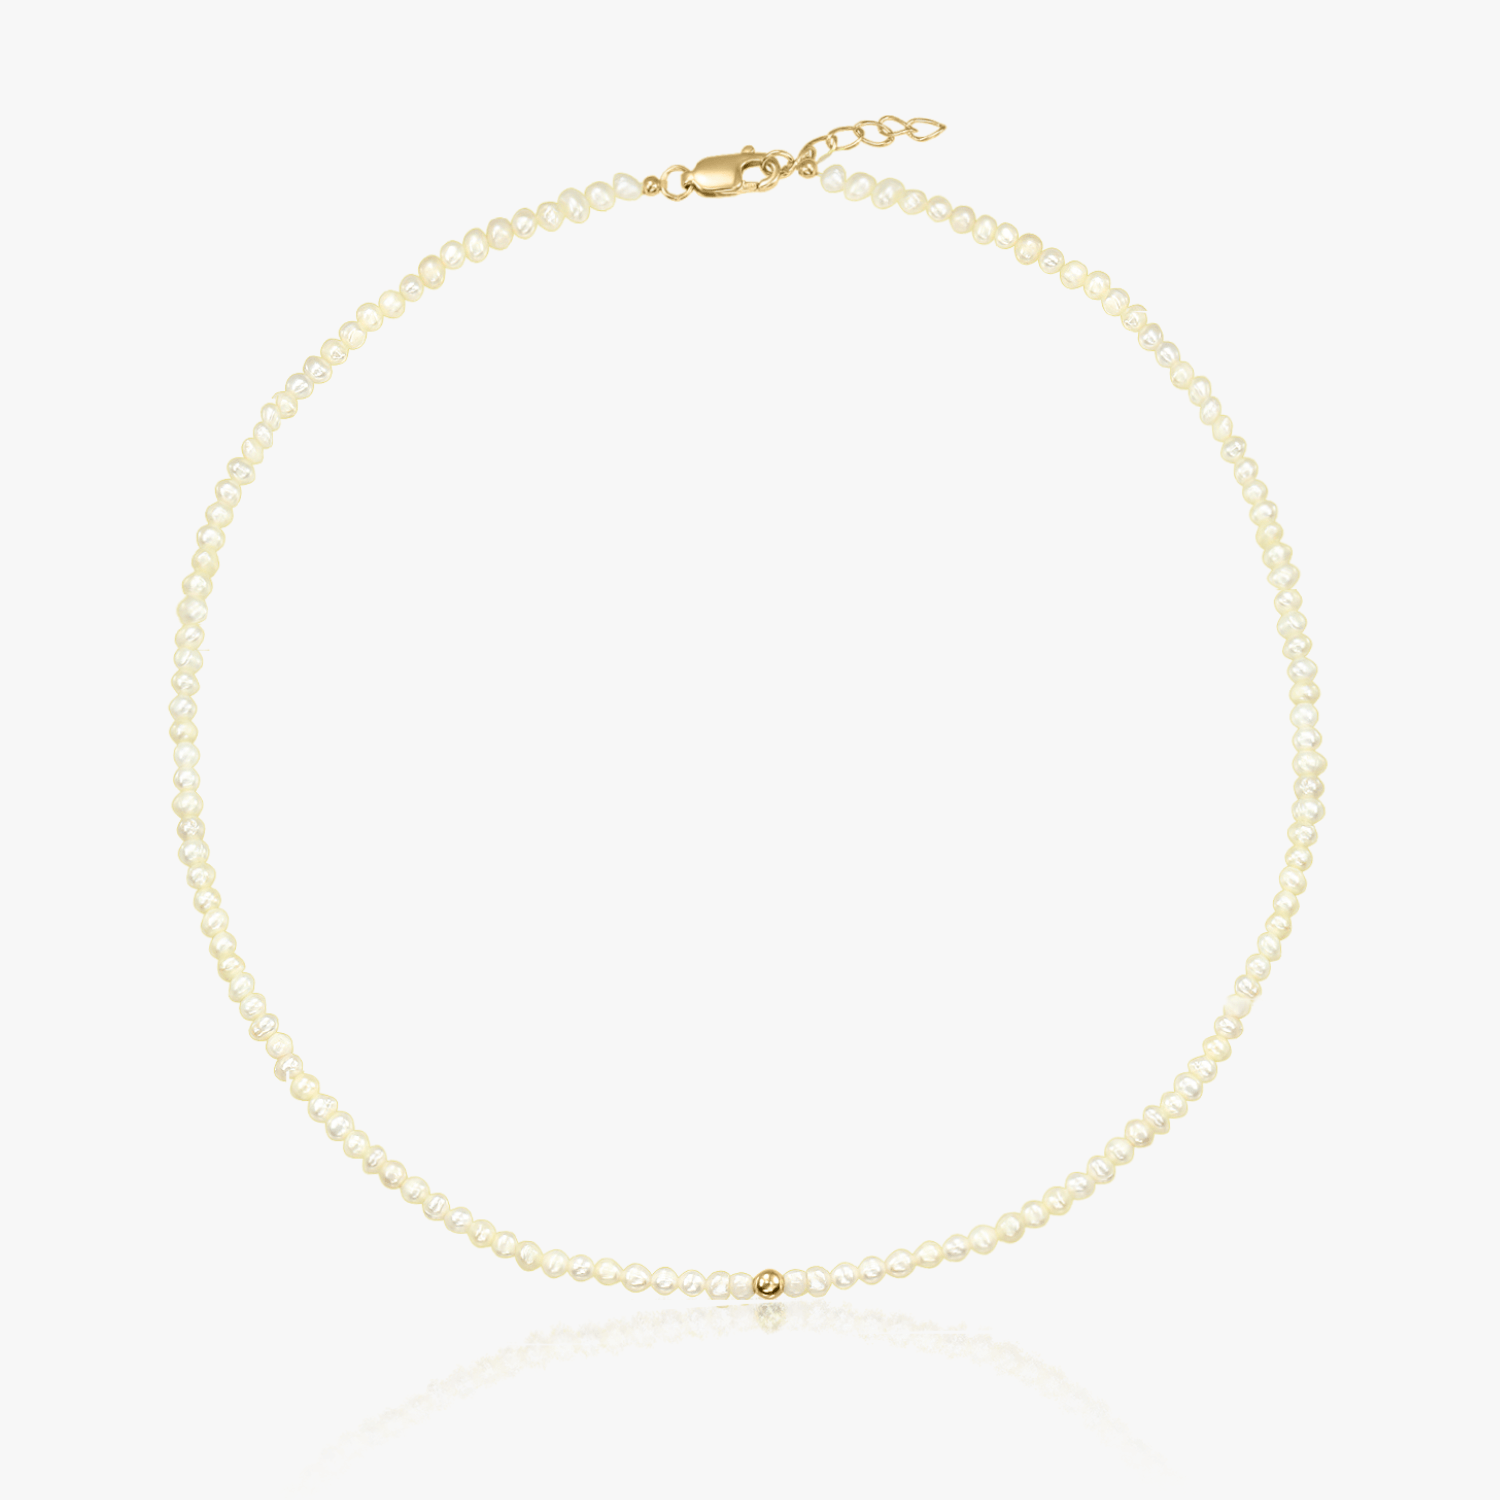 Glamor gold necklace - Natural pearls